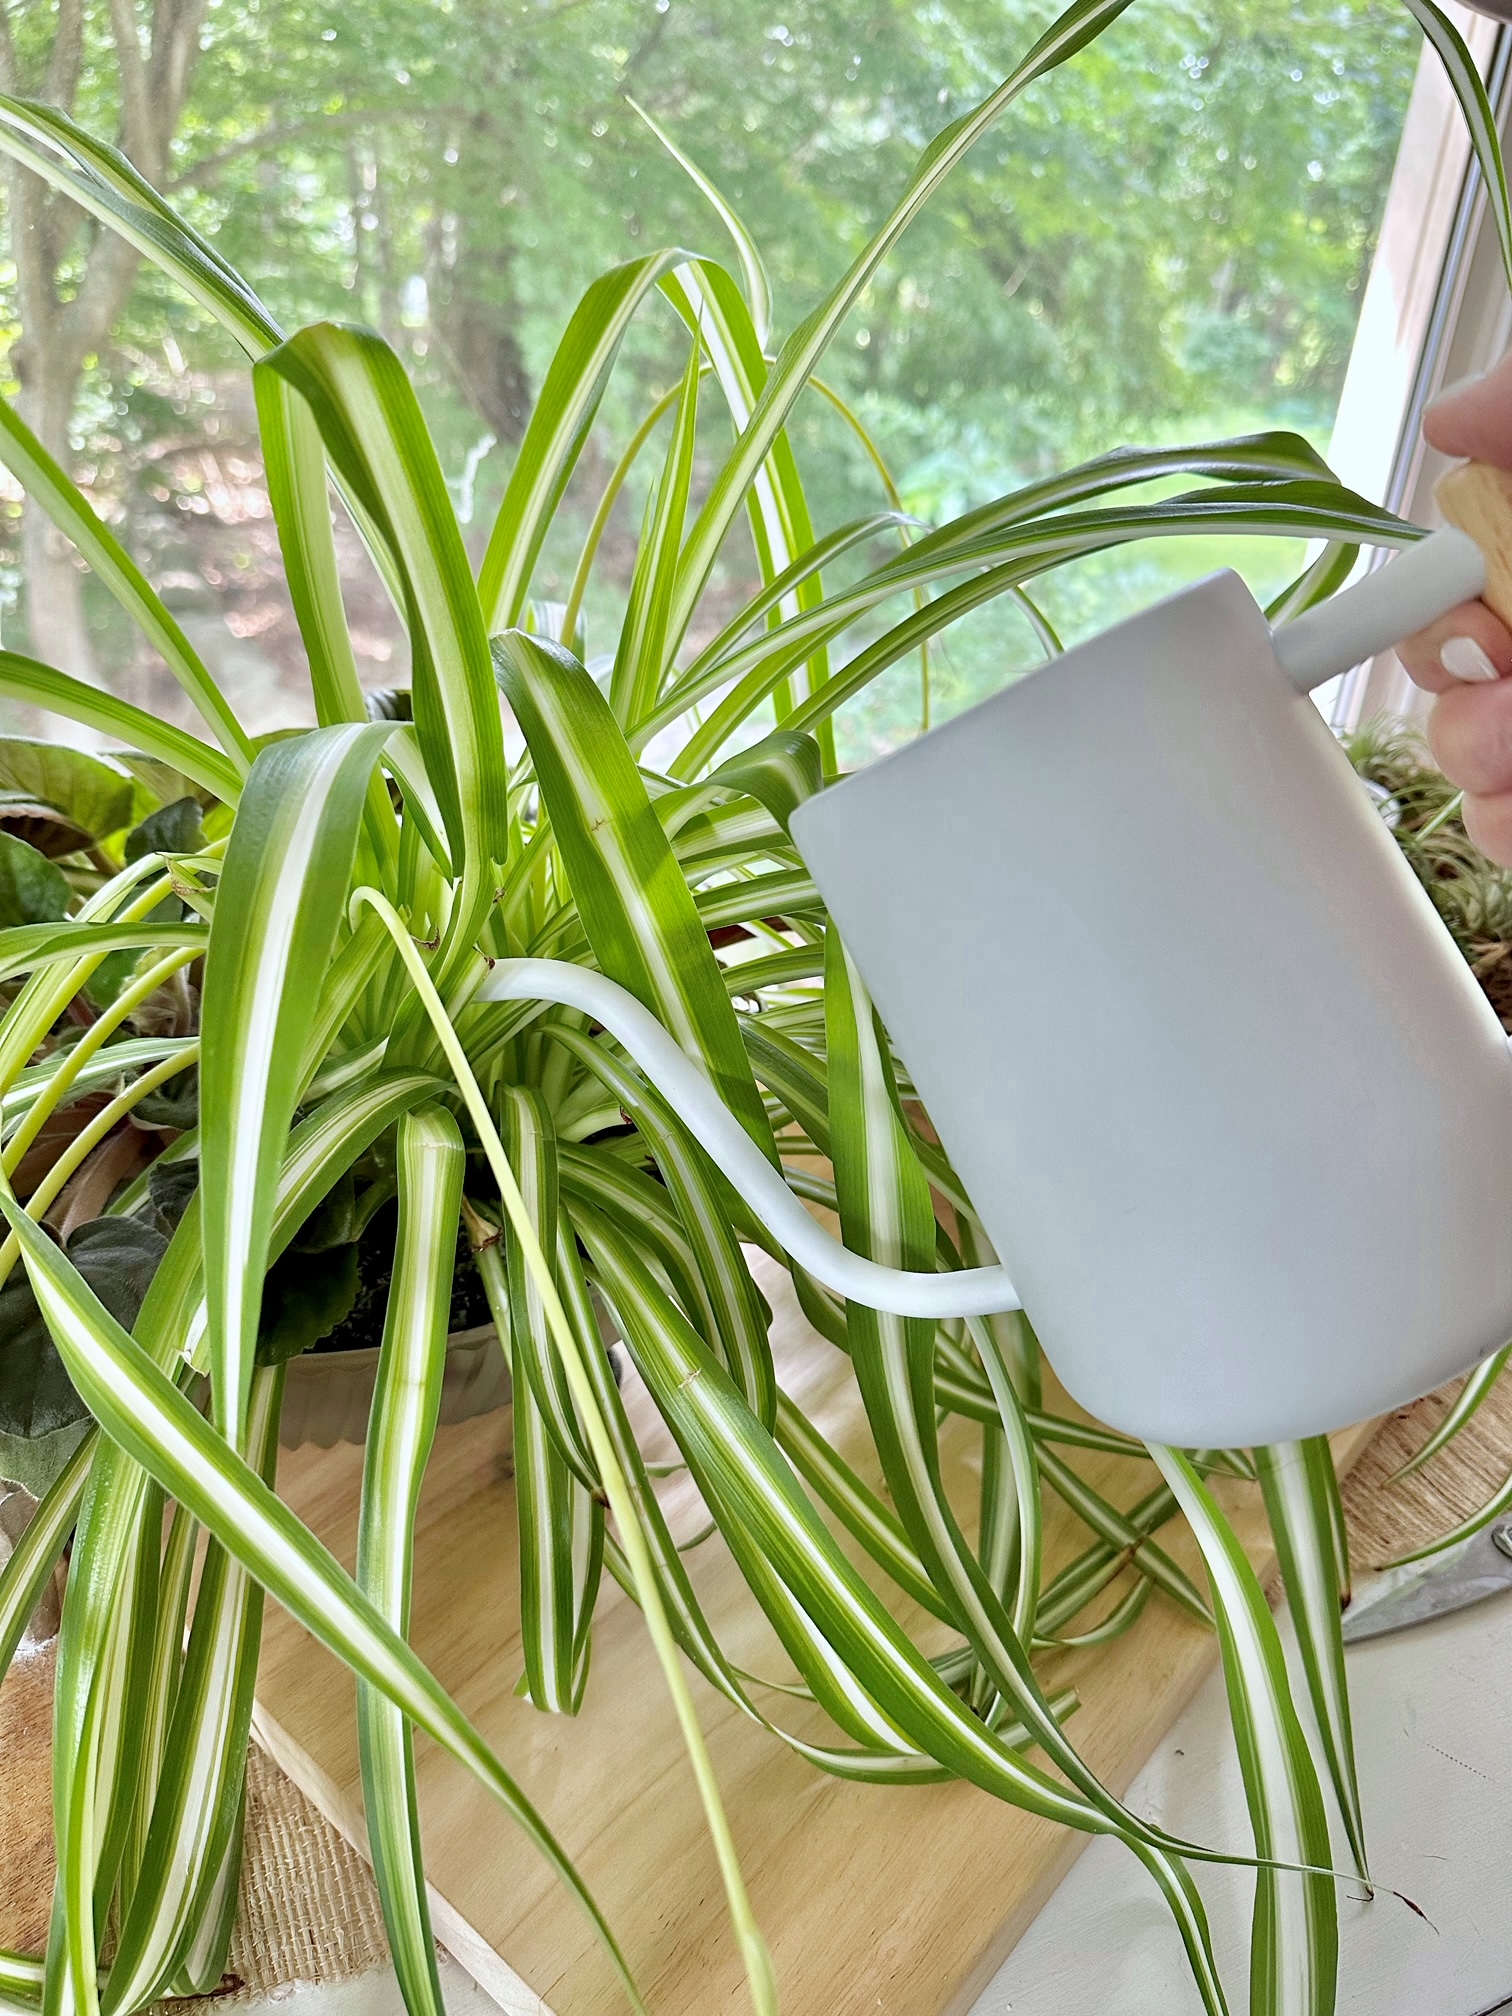 Top 10 Quick Tips for Watering Spider Plants